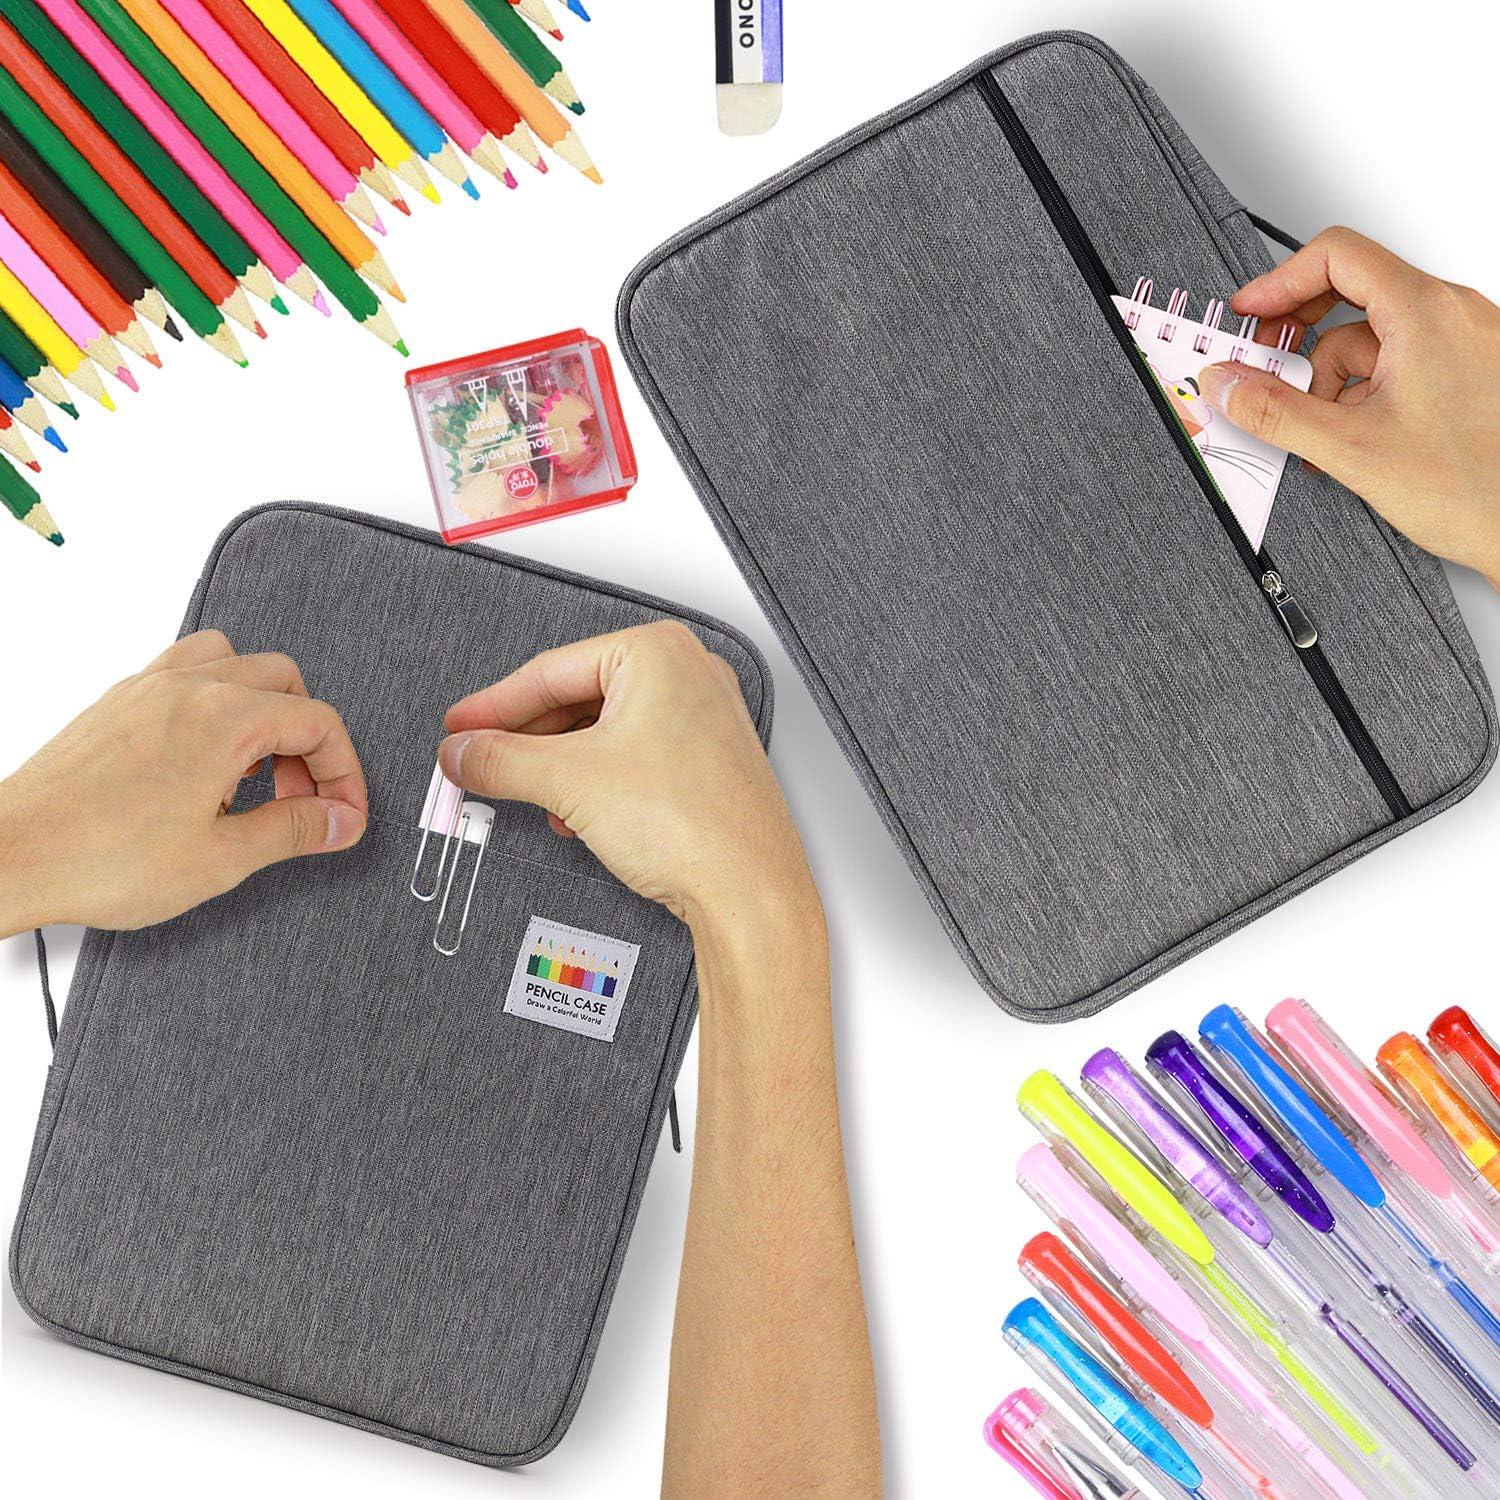 YOUSHARES Big Capacity Colored Pencil Case - 480 Slots large Pen Case  Organizer with Multilayer Holder for Prismacolor Colored Pencils & Gel Pen